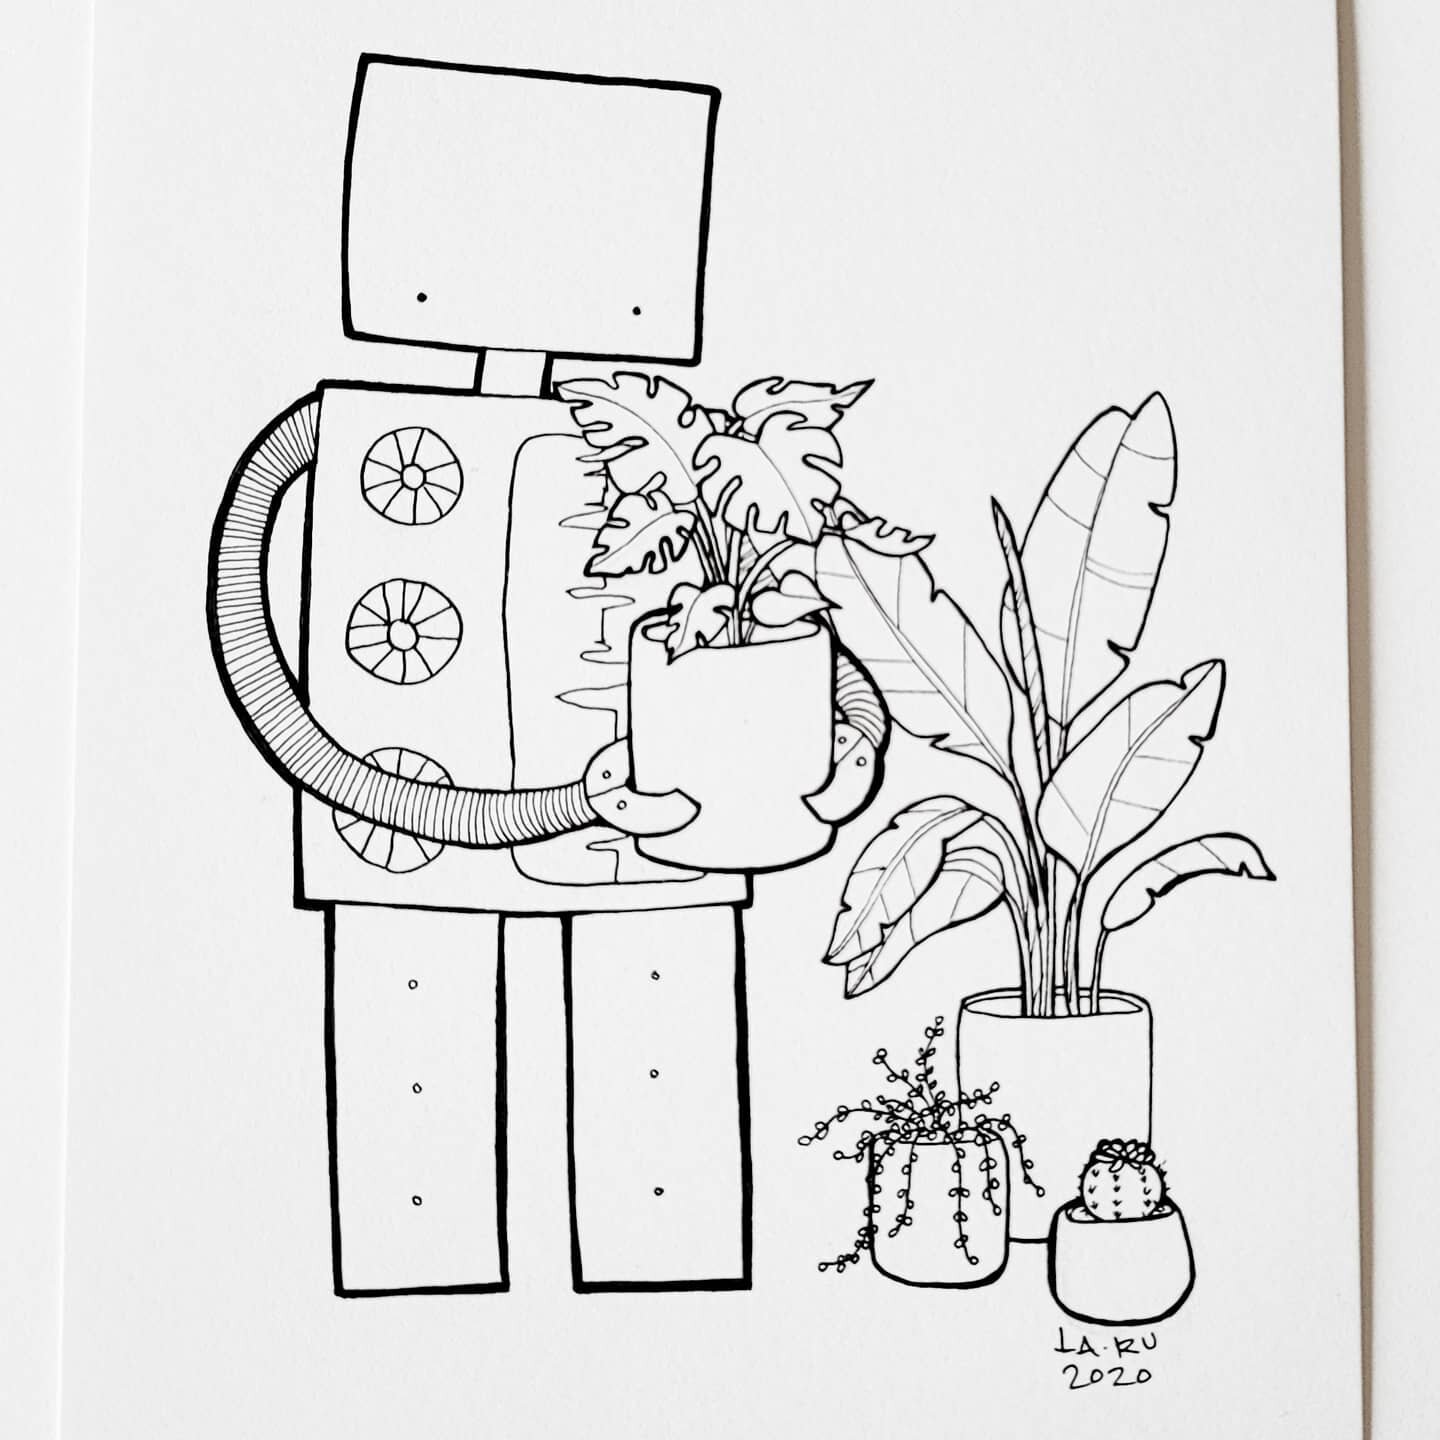 I couldn't sleep last night and really wanted to draw some monstera and bird of paradise plants. 
.
.
.
.
#robotvsloth #robotvssloth #plants #monstera #birdofparadise #robot #robotsofinstagram #illustration #drawing #penandink #handdrawn